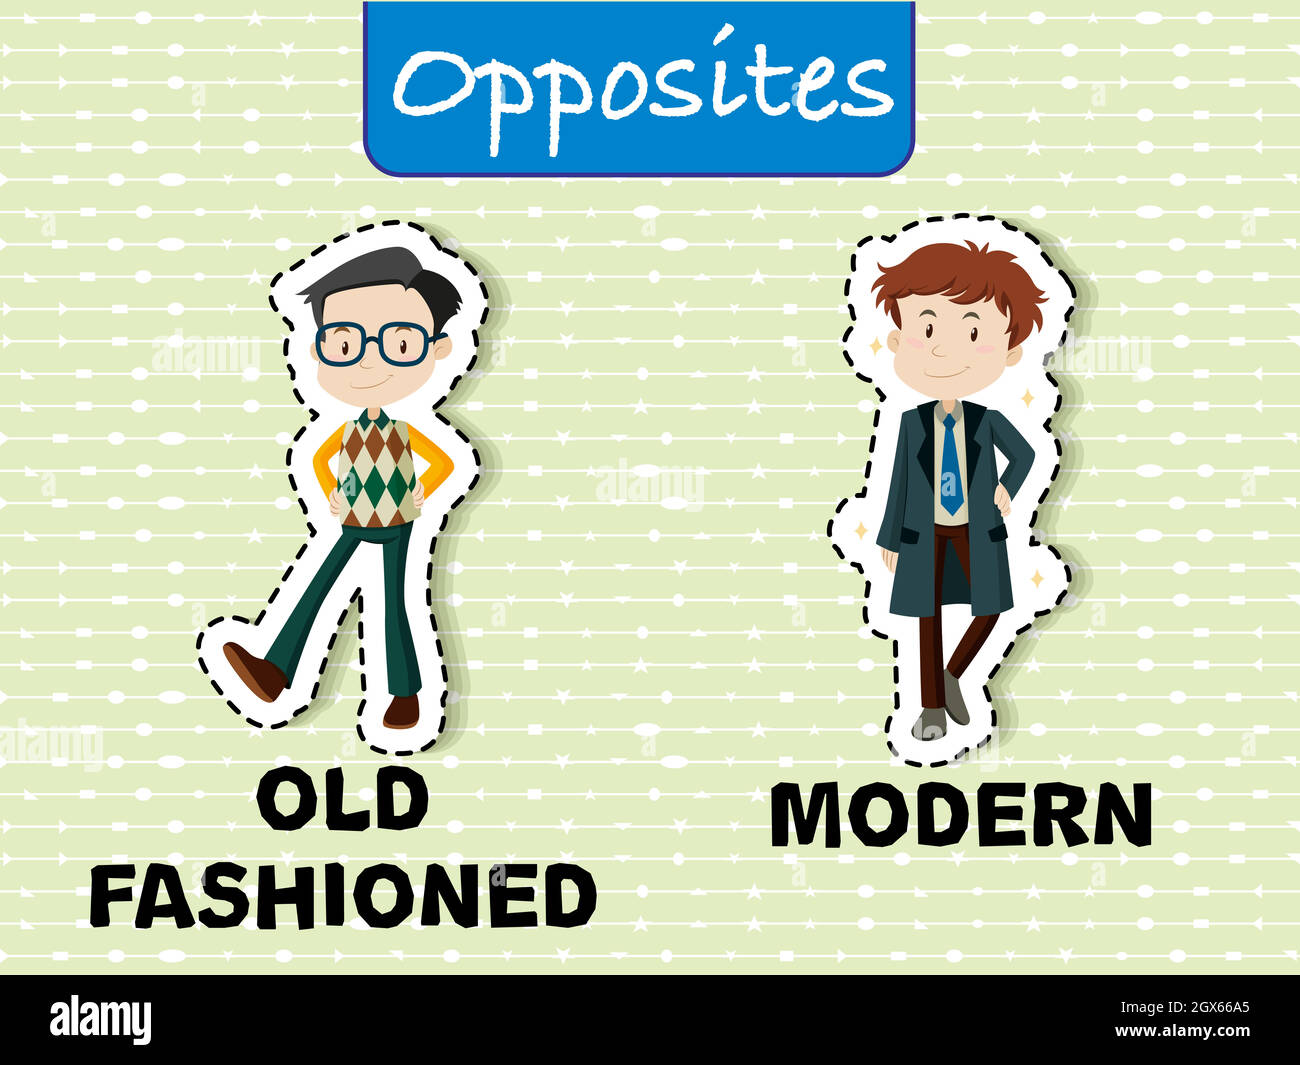 Opposite words for old fashioned and modern Stock Vector